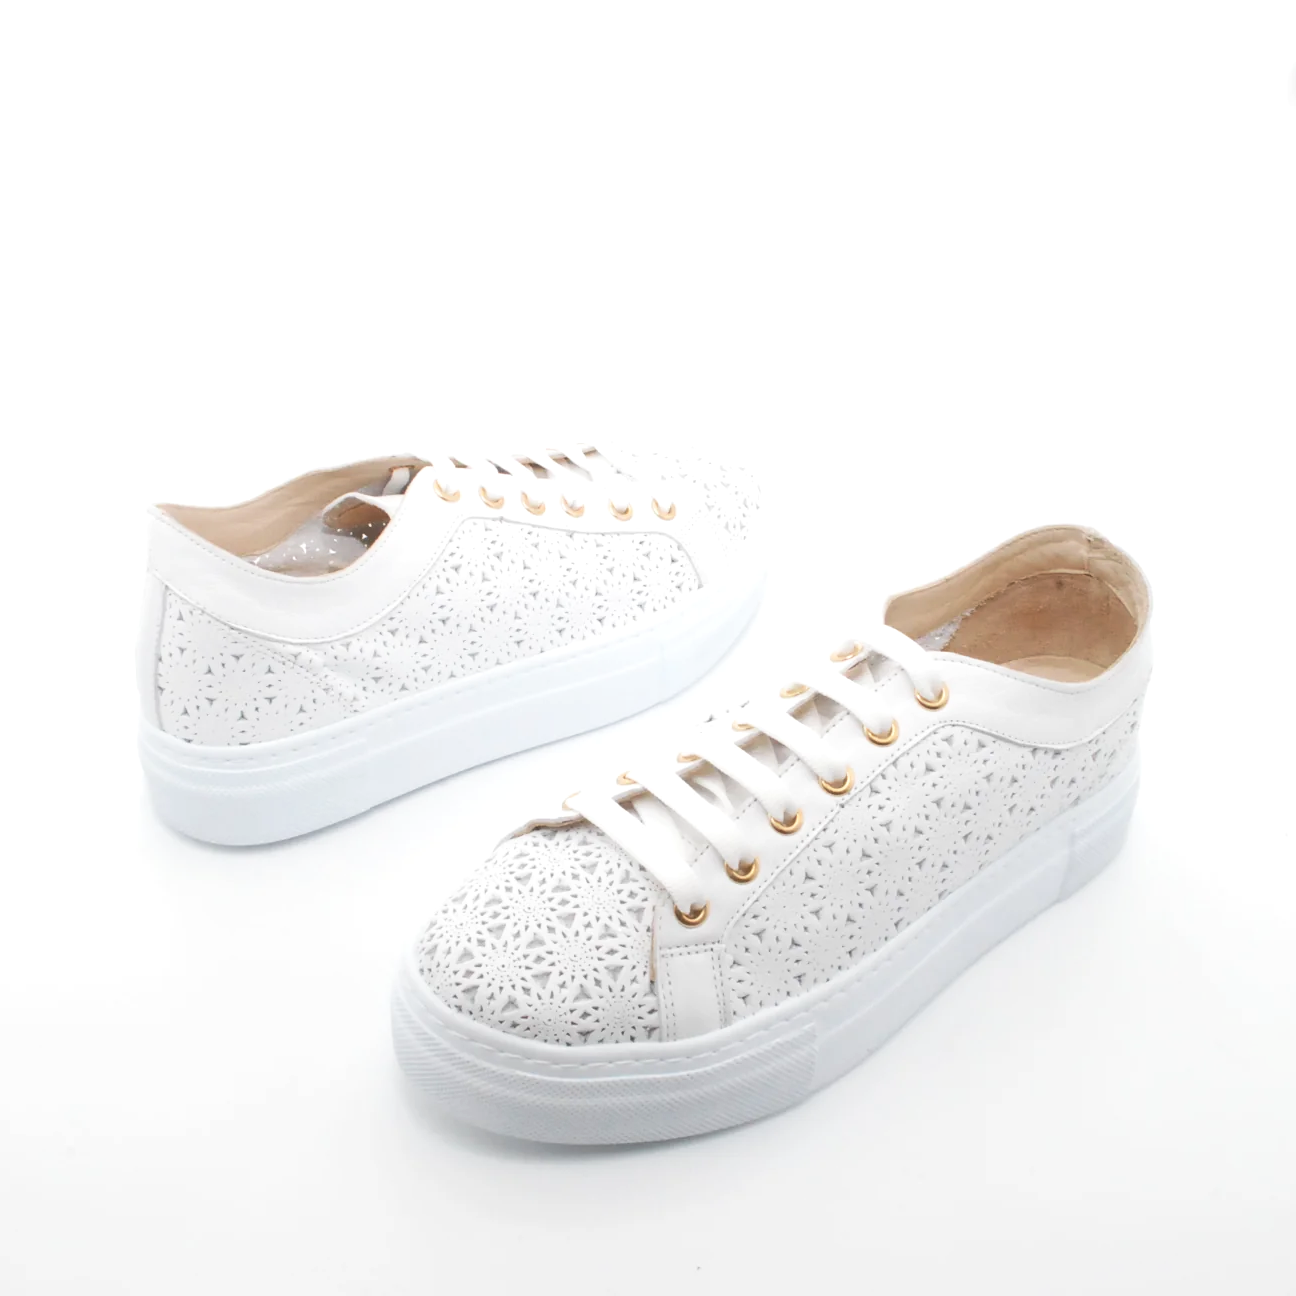 sneakers-wave-in-pelle-traforata-sneakers-2_58c0ffd6-5754-448d-9ed3-4fe15d372edf.png